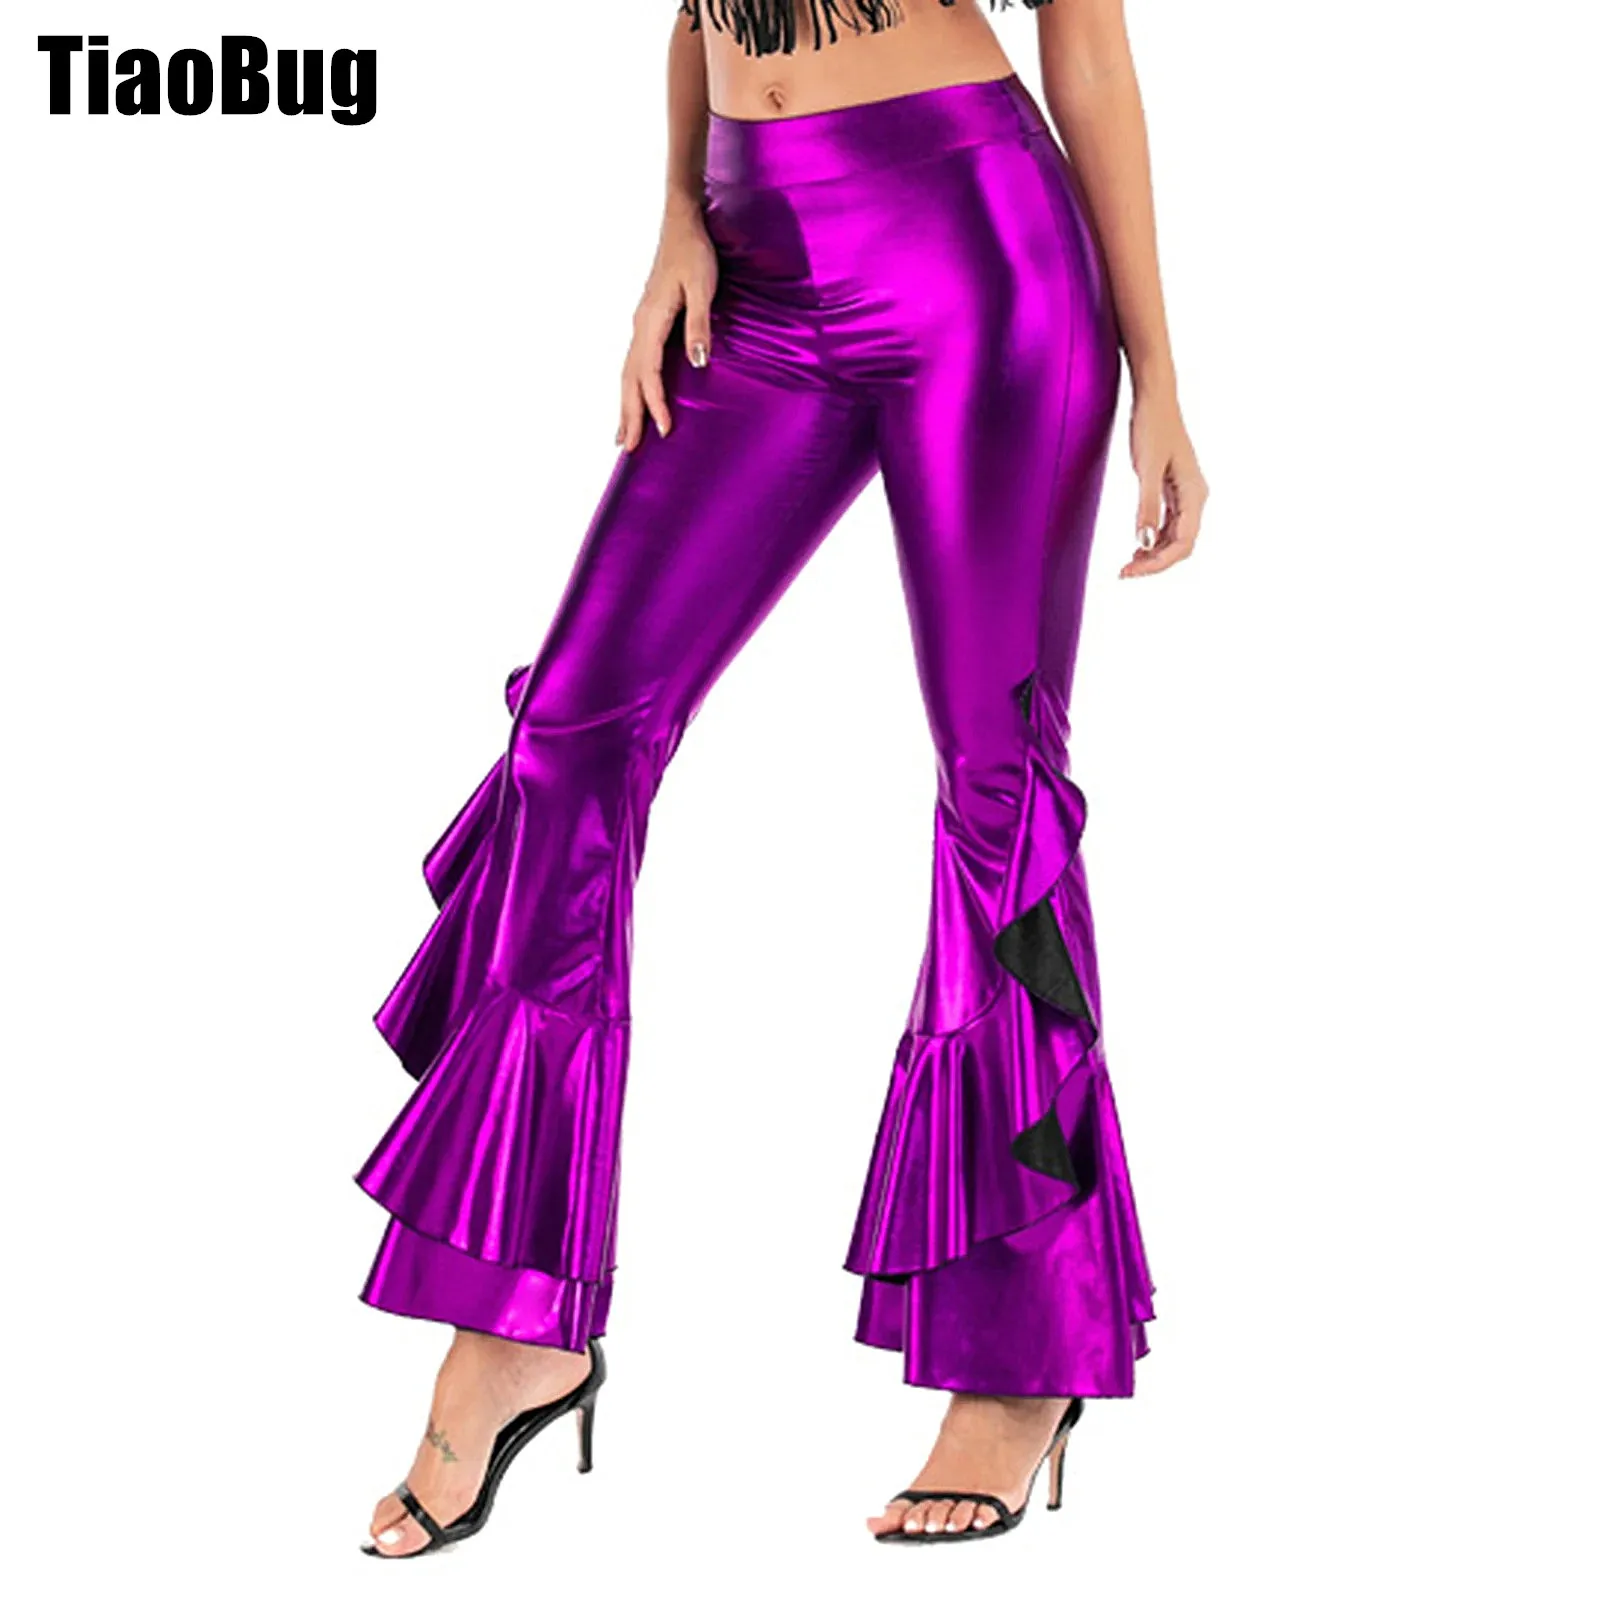 Womens Metallic Ruffle Flared Pants Fashion High Waist Bell-Bottomed Trousers for Dance Party Music Festival Club Raves